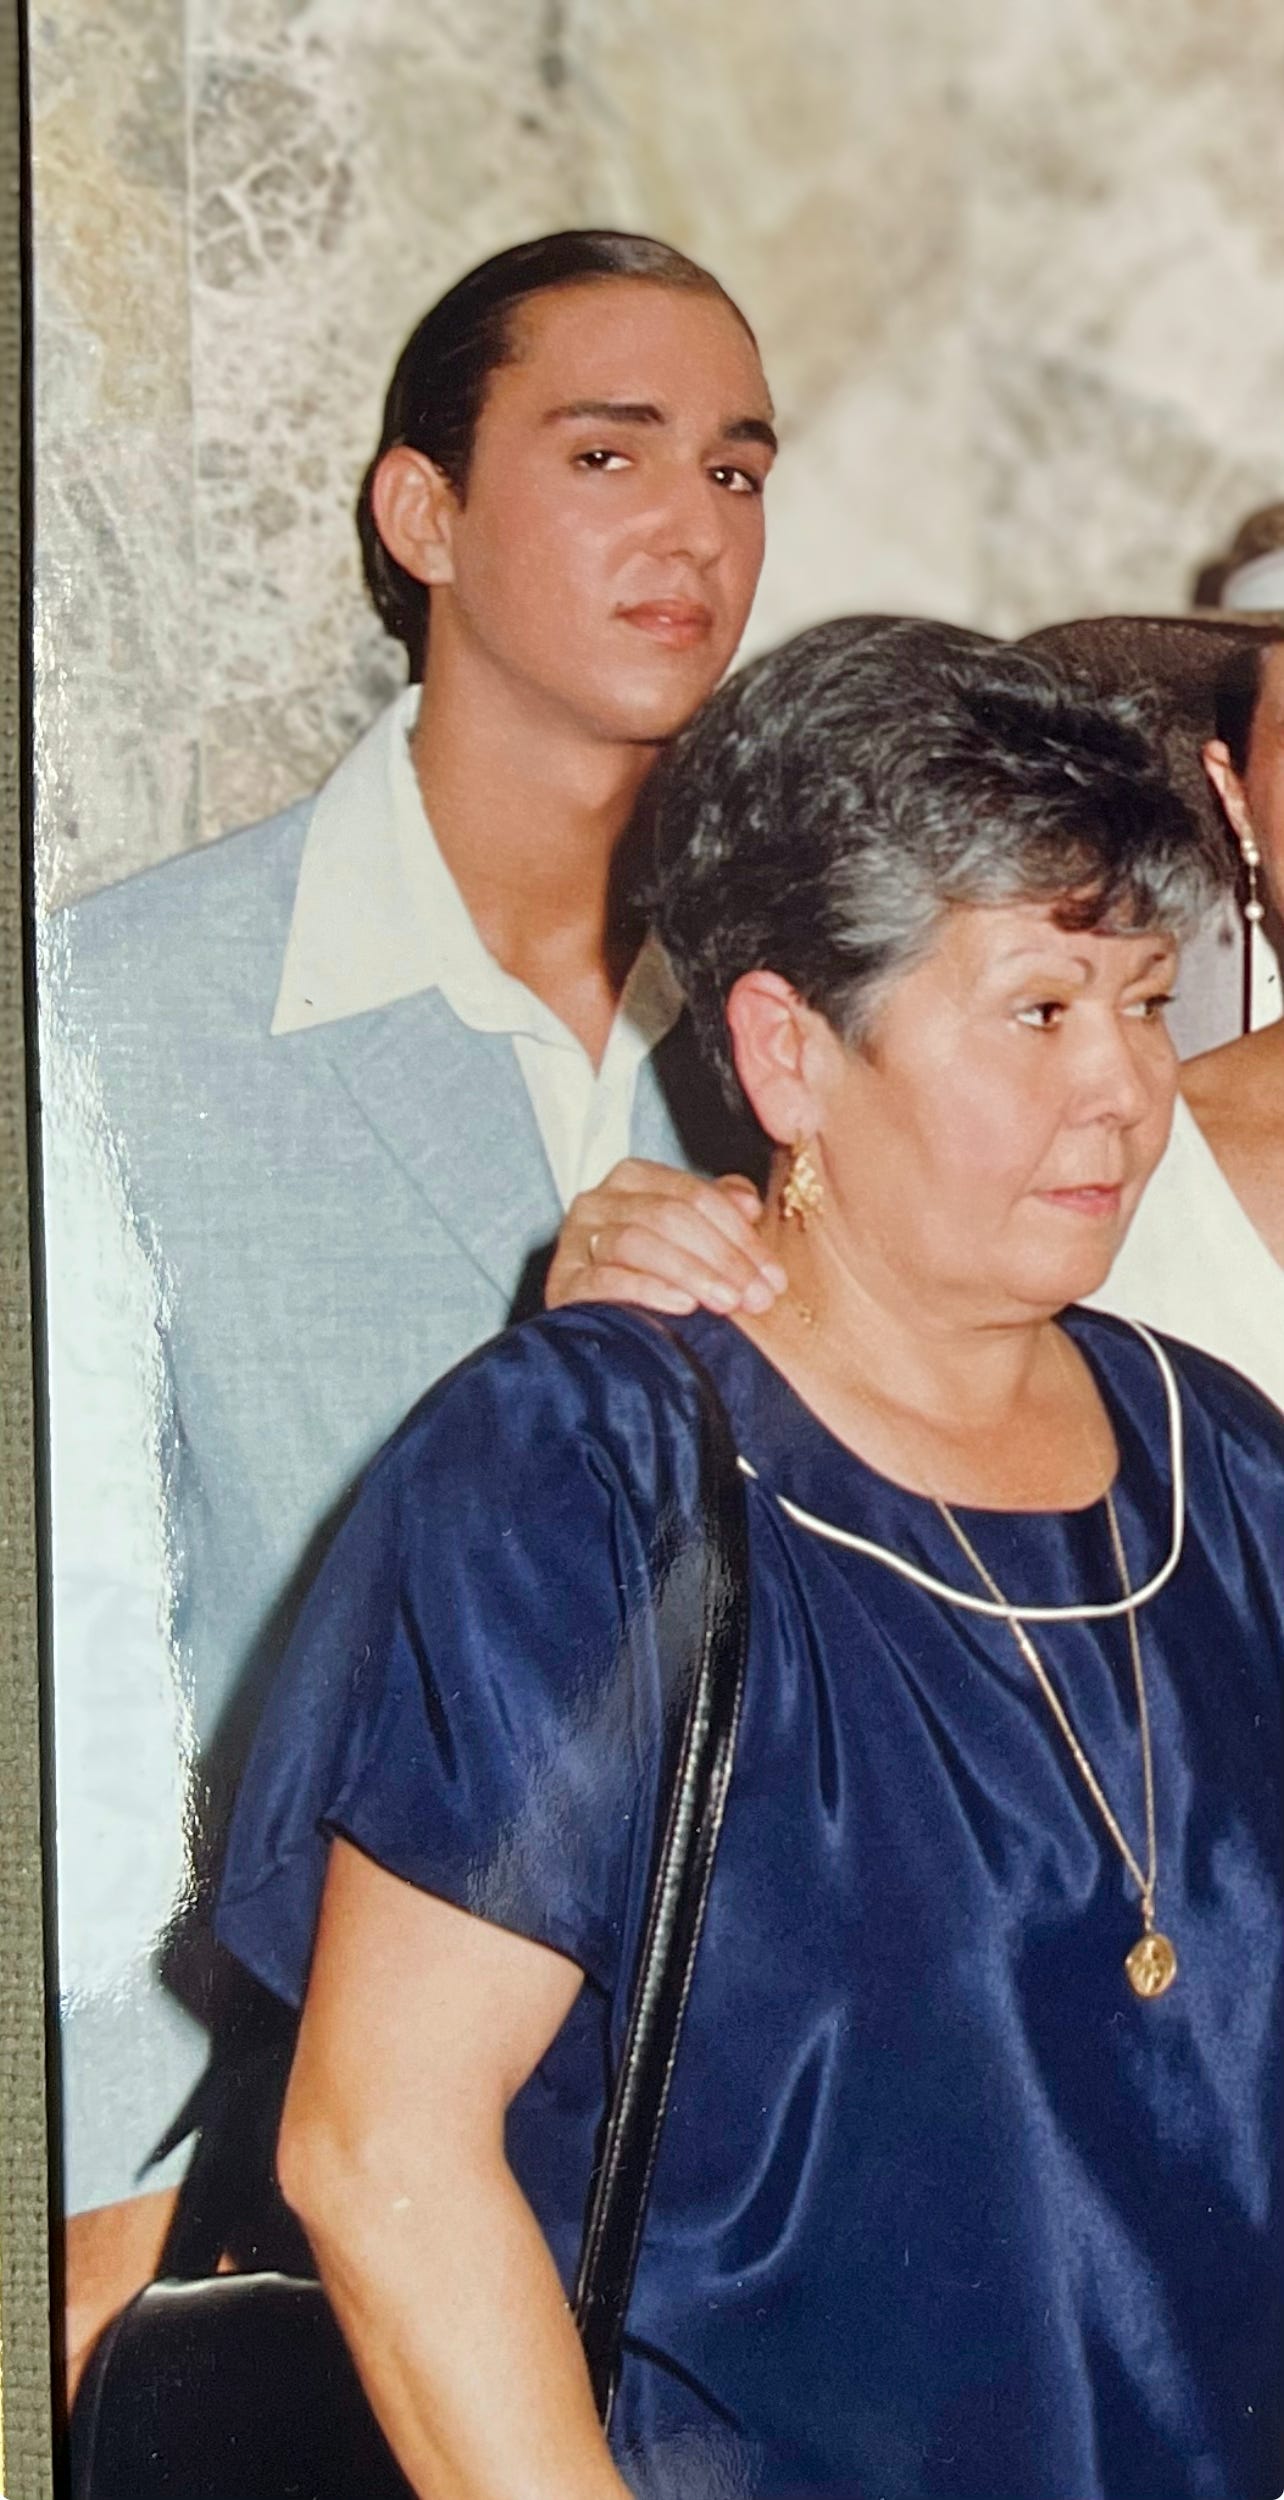 The image shows a vintage photo of myself and my mum captured in a close, affectionate stance at my sister’s wedding. I was 17, with slicked-back hair, a light blue shirt, and a prominent, confident gaze. My mum is dressed in a dark blue outfit, adorned with a gold necklace and matching earrings, exuding a look of composed matriarchal warmth. 